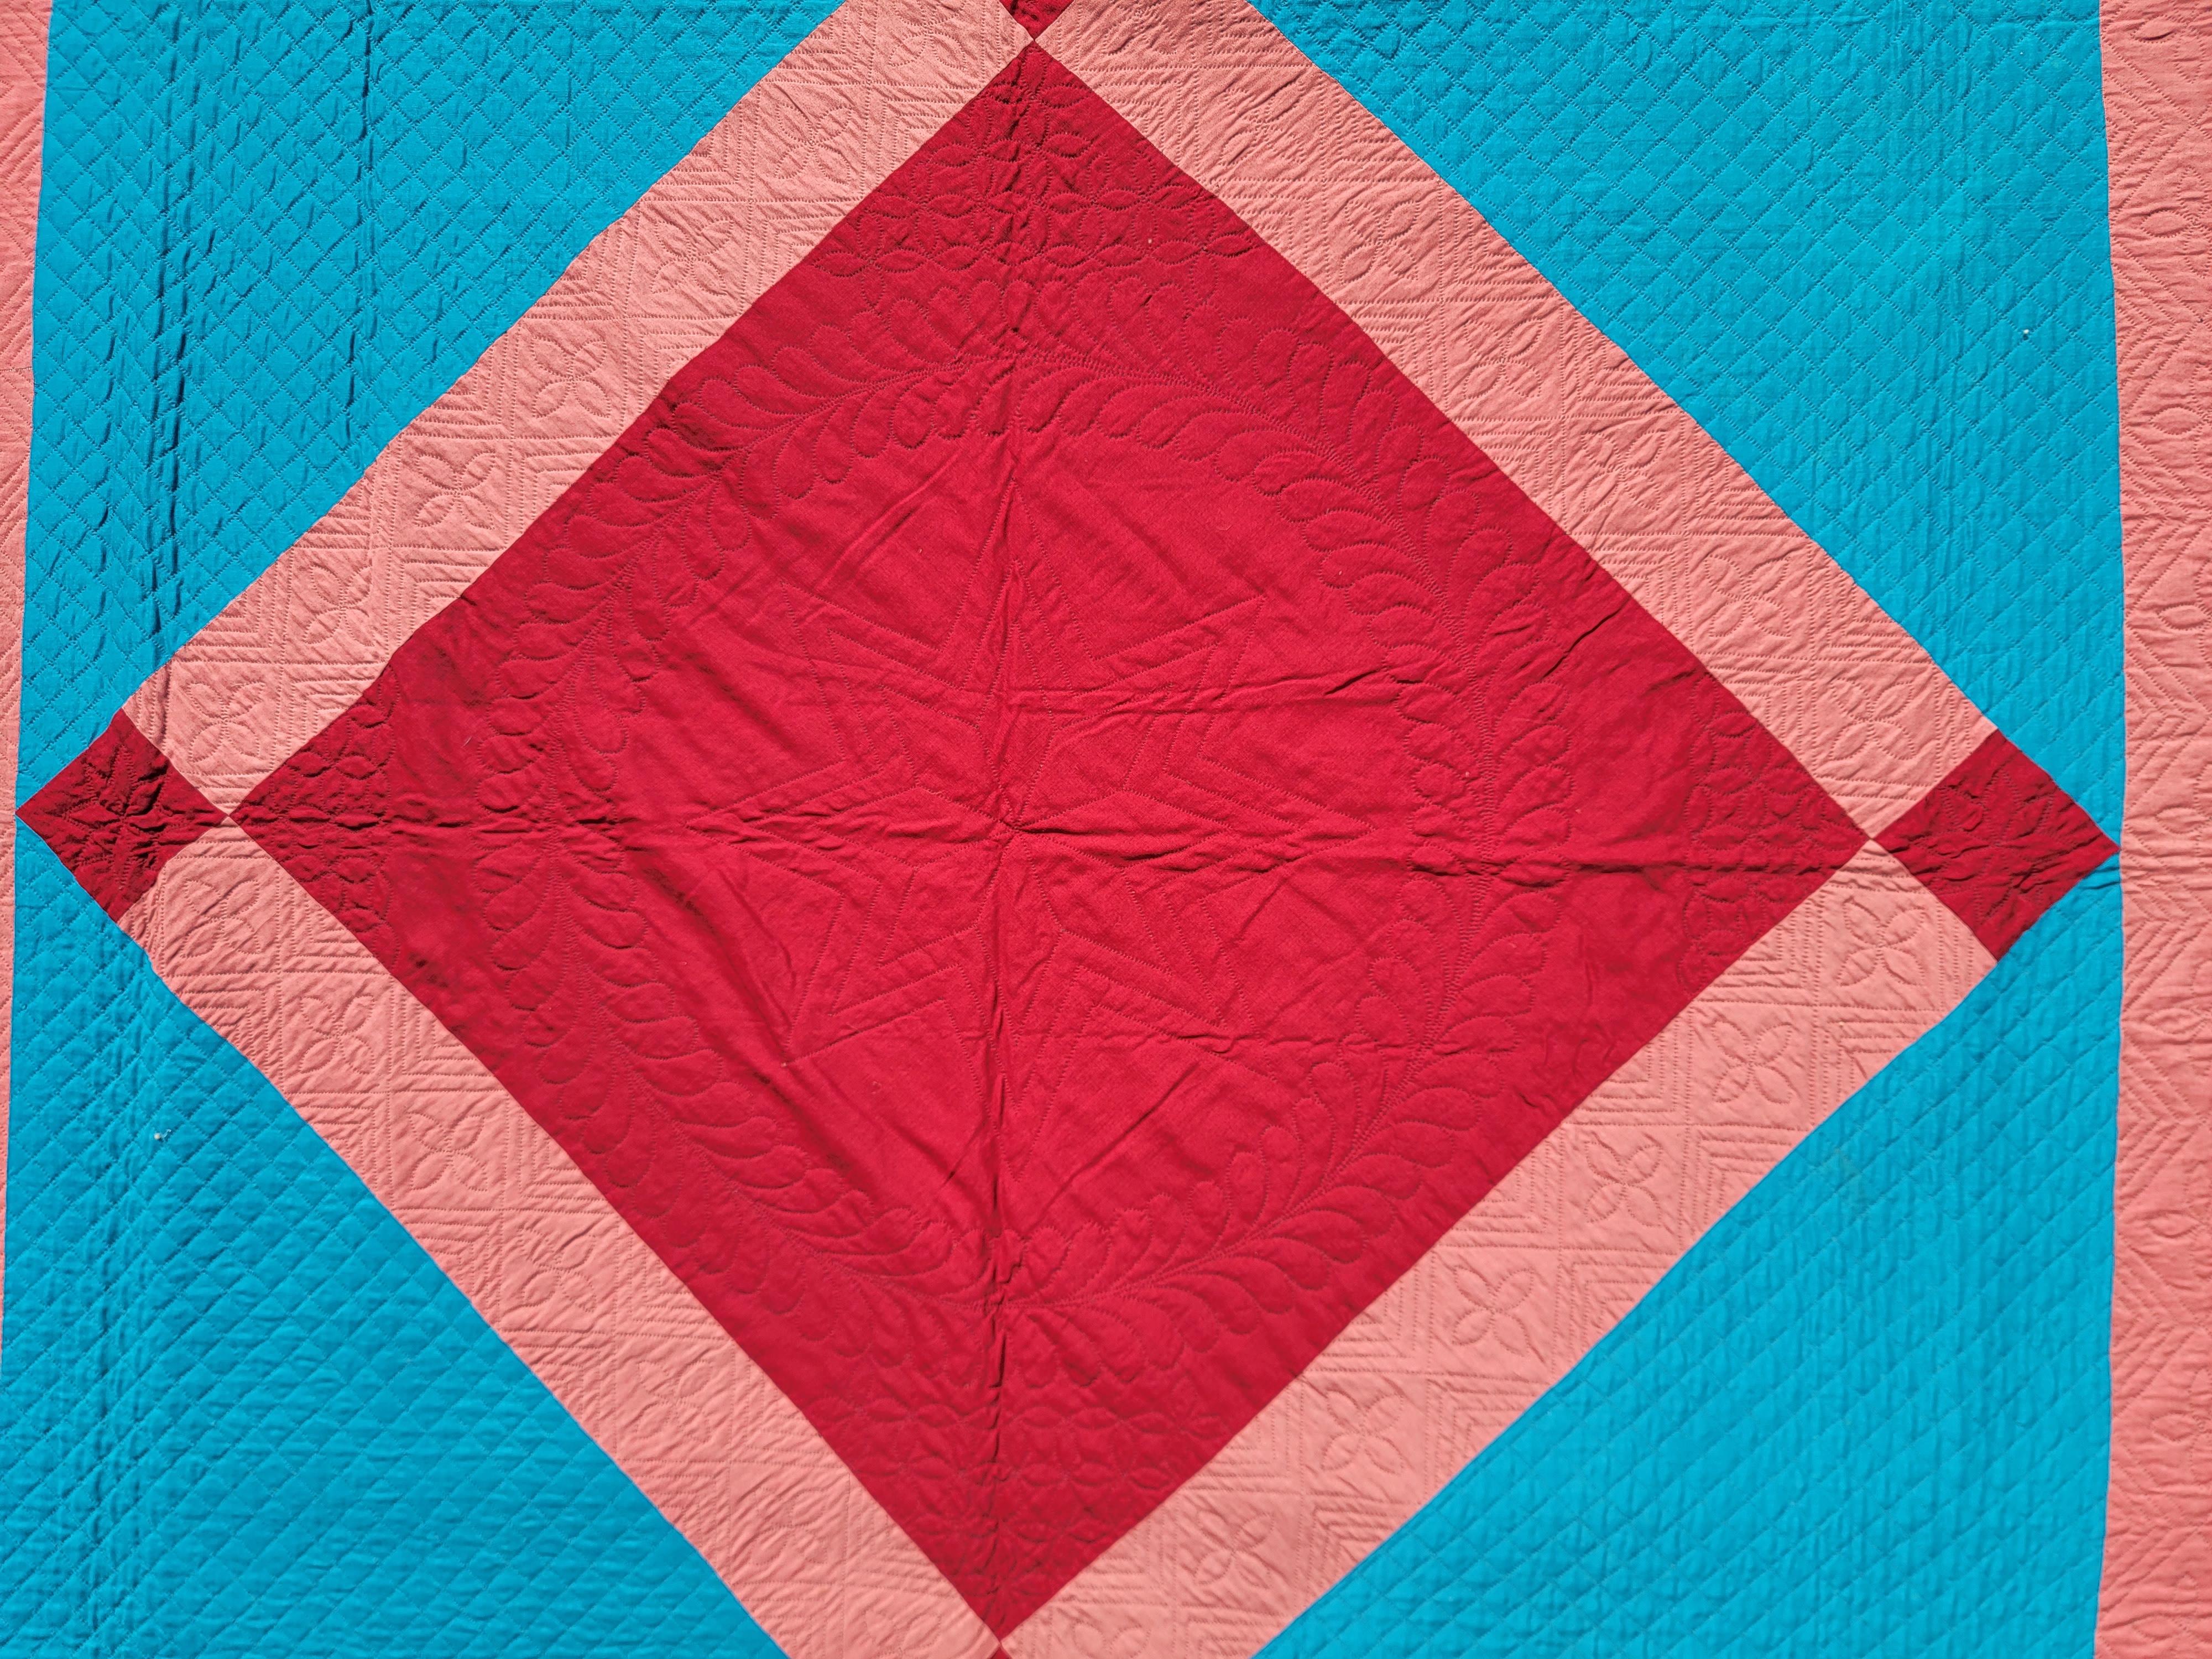 Early Amish 20thc diamond in a square quilt in wool.Amazing condition and colors from a 50 year collection never offered for sale before. The colors are most unusual for Lancaster Amish wool quilts.